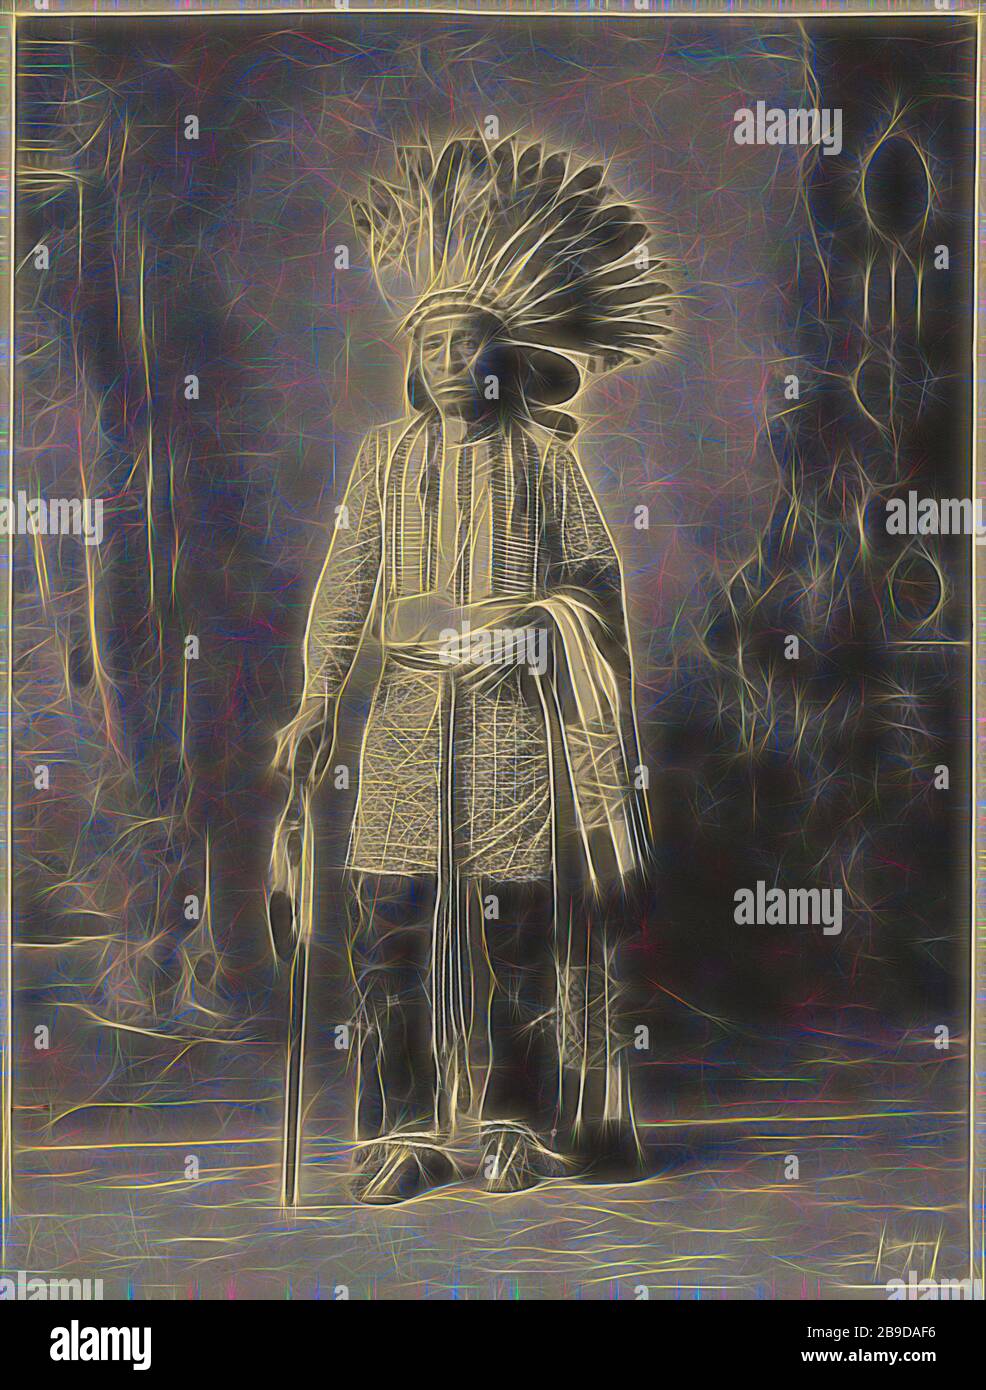 Native American Male, Adolph F. Muhr (American, died 1913), Frank A. Rinehart (American, 1861 - 1928), 1898, Platinum print, 23.5 x 17.8 cm (9 1,4 x 7 in, Reimagined by Gibon, design of warm cheerful glowing of brightness and light rays radiance. Classic art reinvented with a modern twist. Photography inspired by futurism, embracing dynamic energy of modern technology, movement, speed and revolutionize culture. Stock Photo